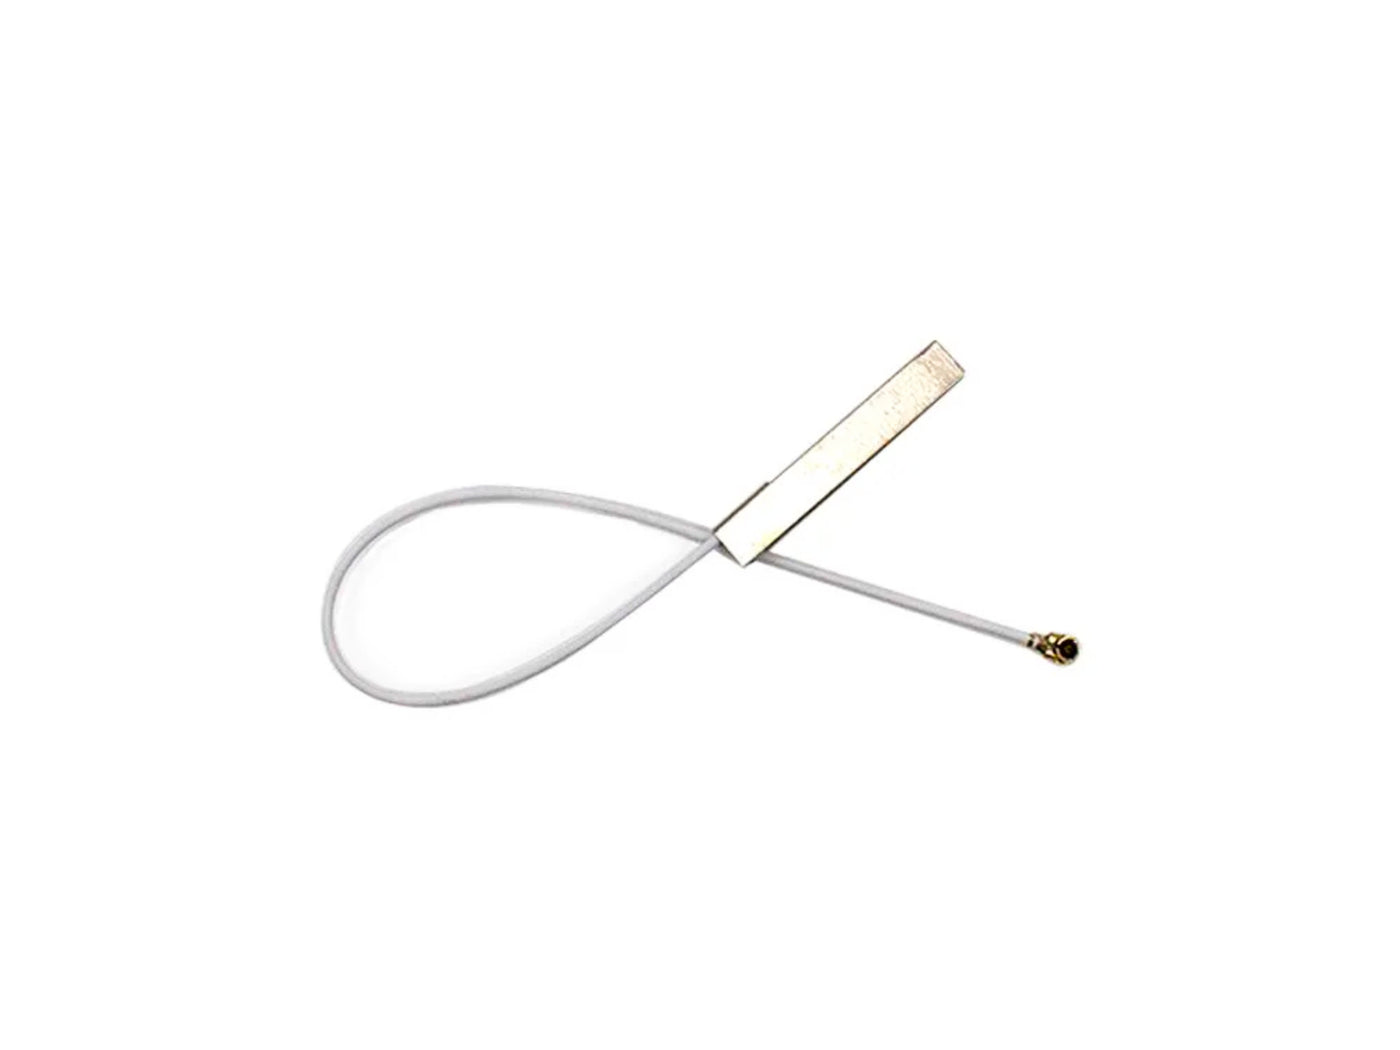 Replacement Internal 2.4G Antenna for FrSky X20